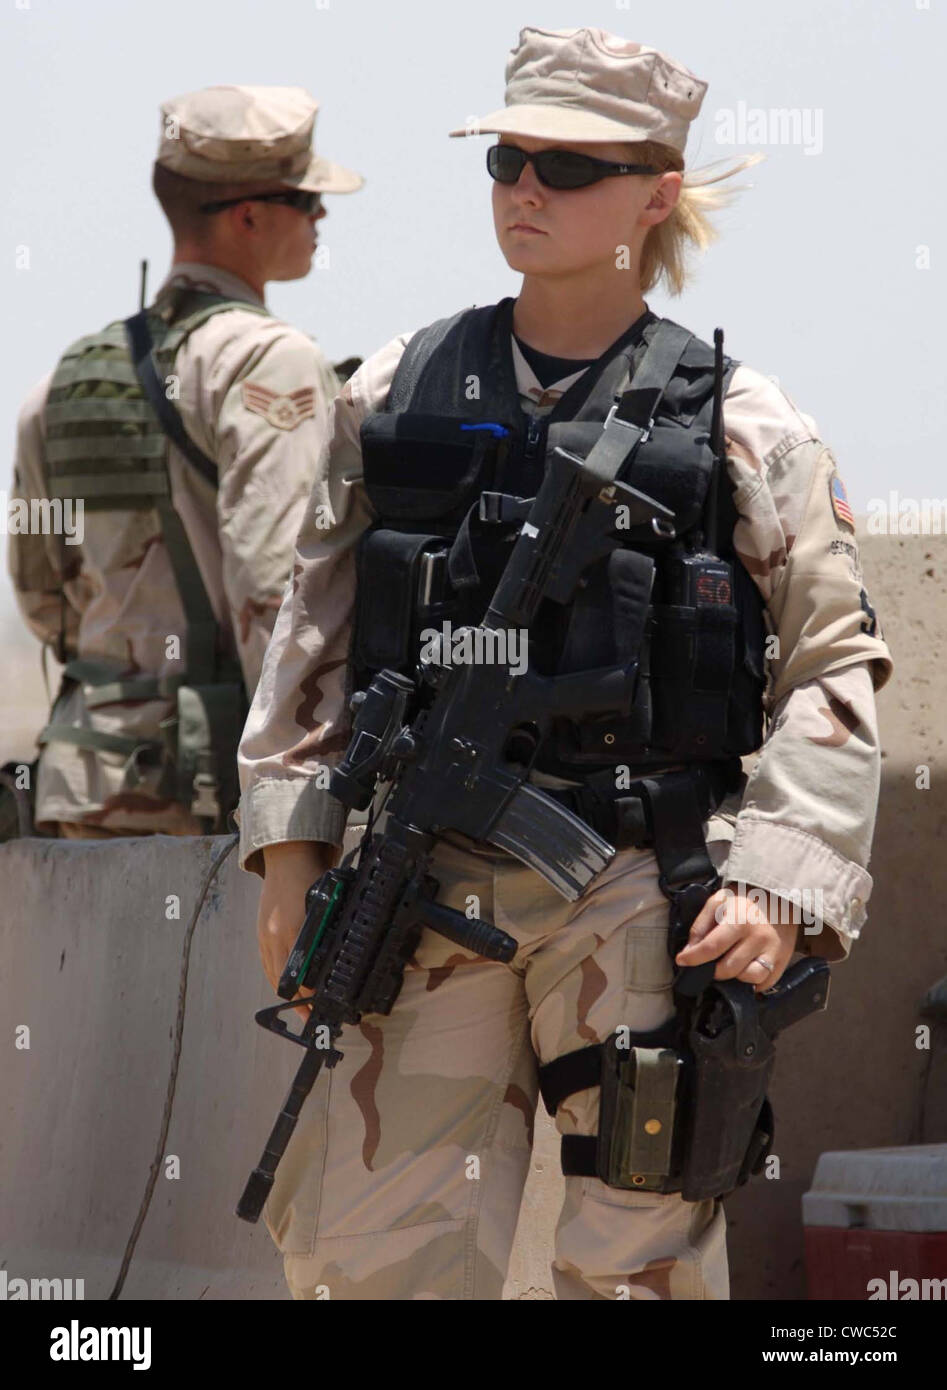 Two US Airman stand watch at Sather Air Base in Iraq. One is female in combat gear. Ca. 2008. (BSLOC 2011 12 368) Stock Photo